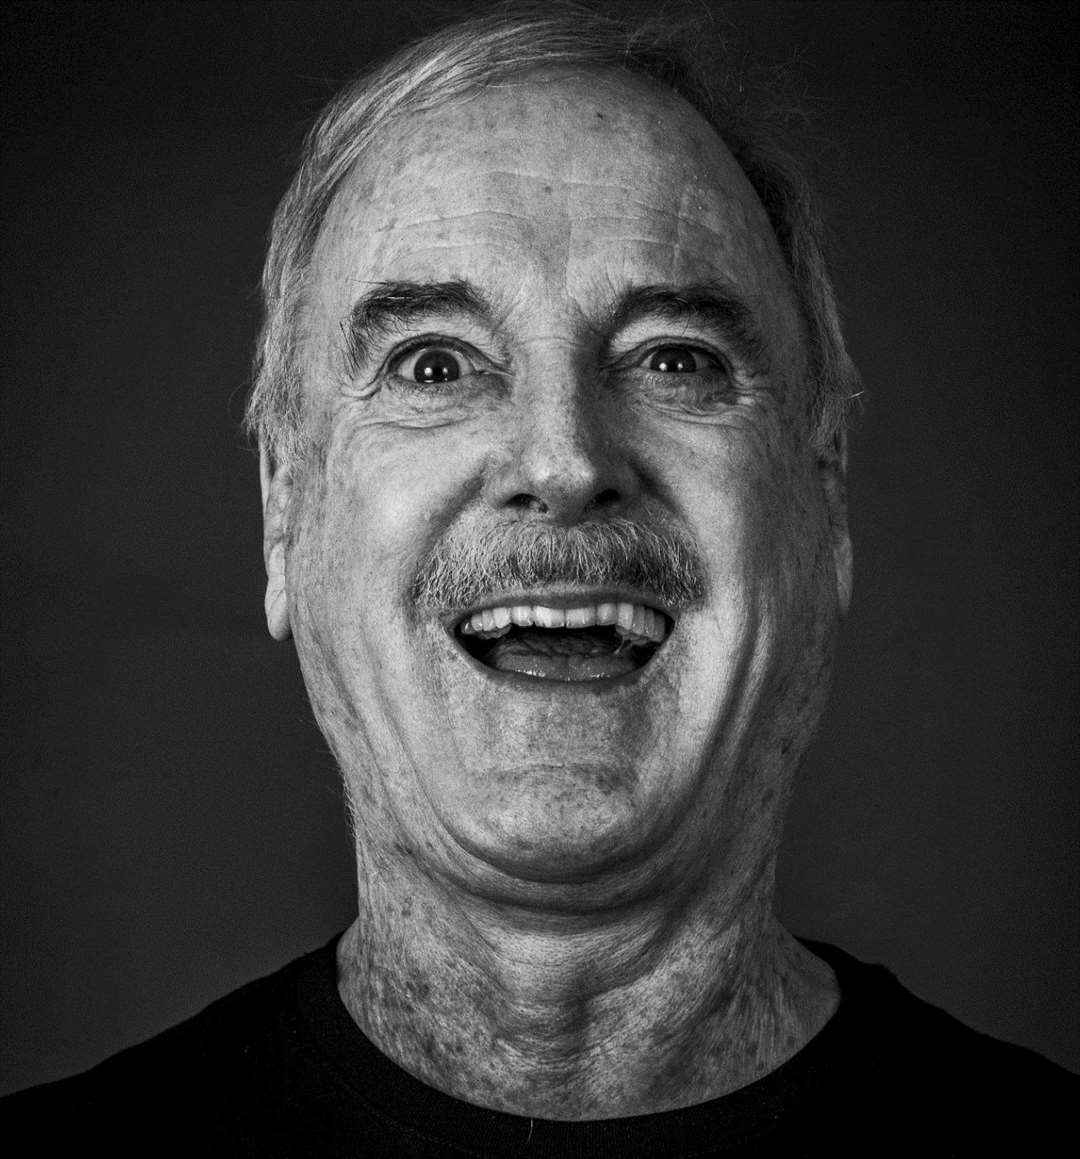 John Cleese's first stage adaptation will be at the Orchard Theatre in Dartford